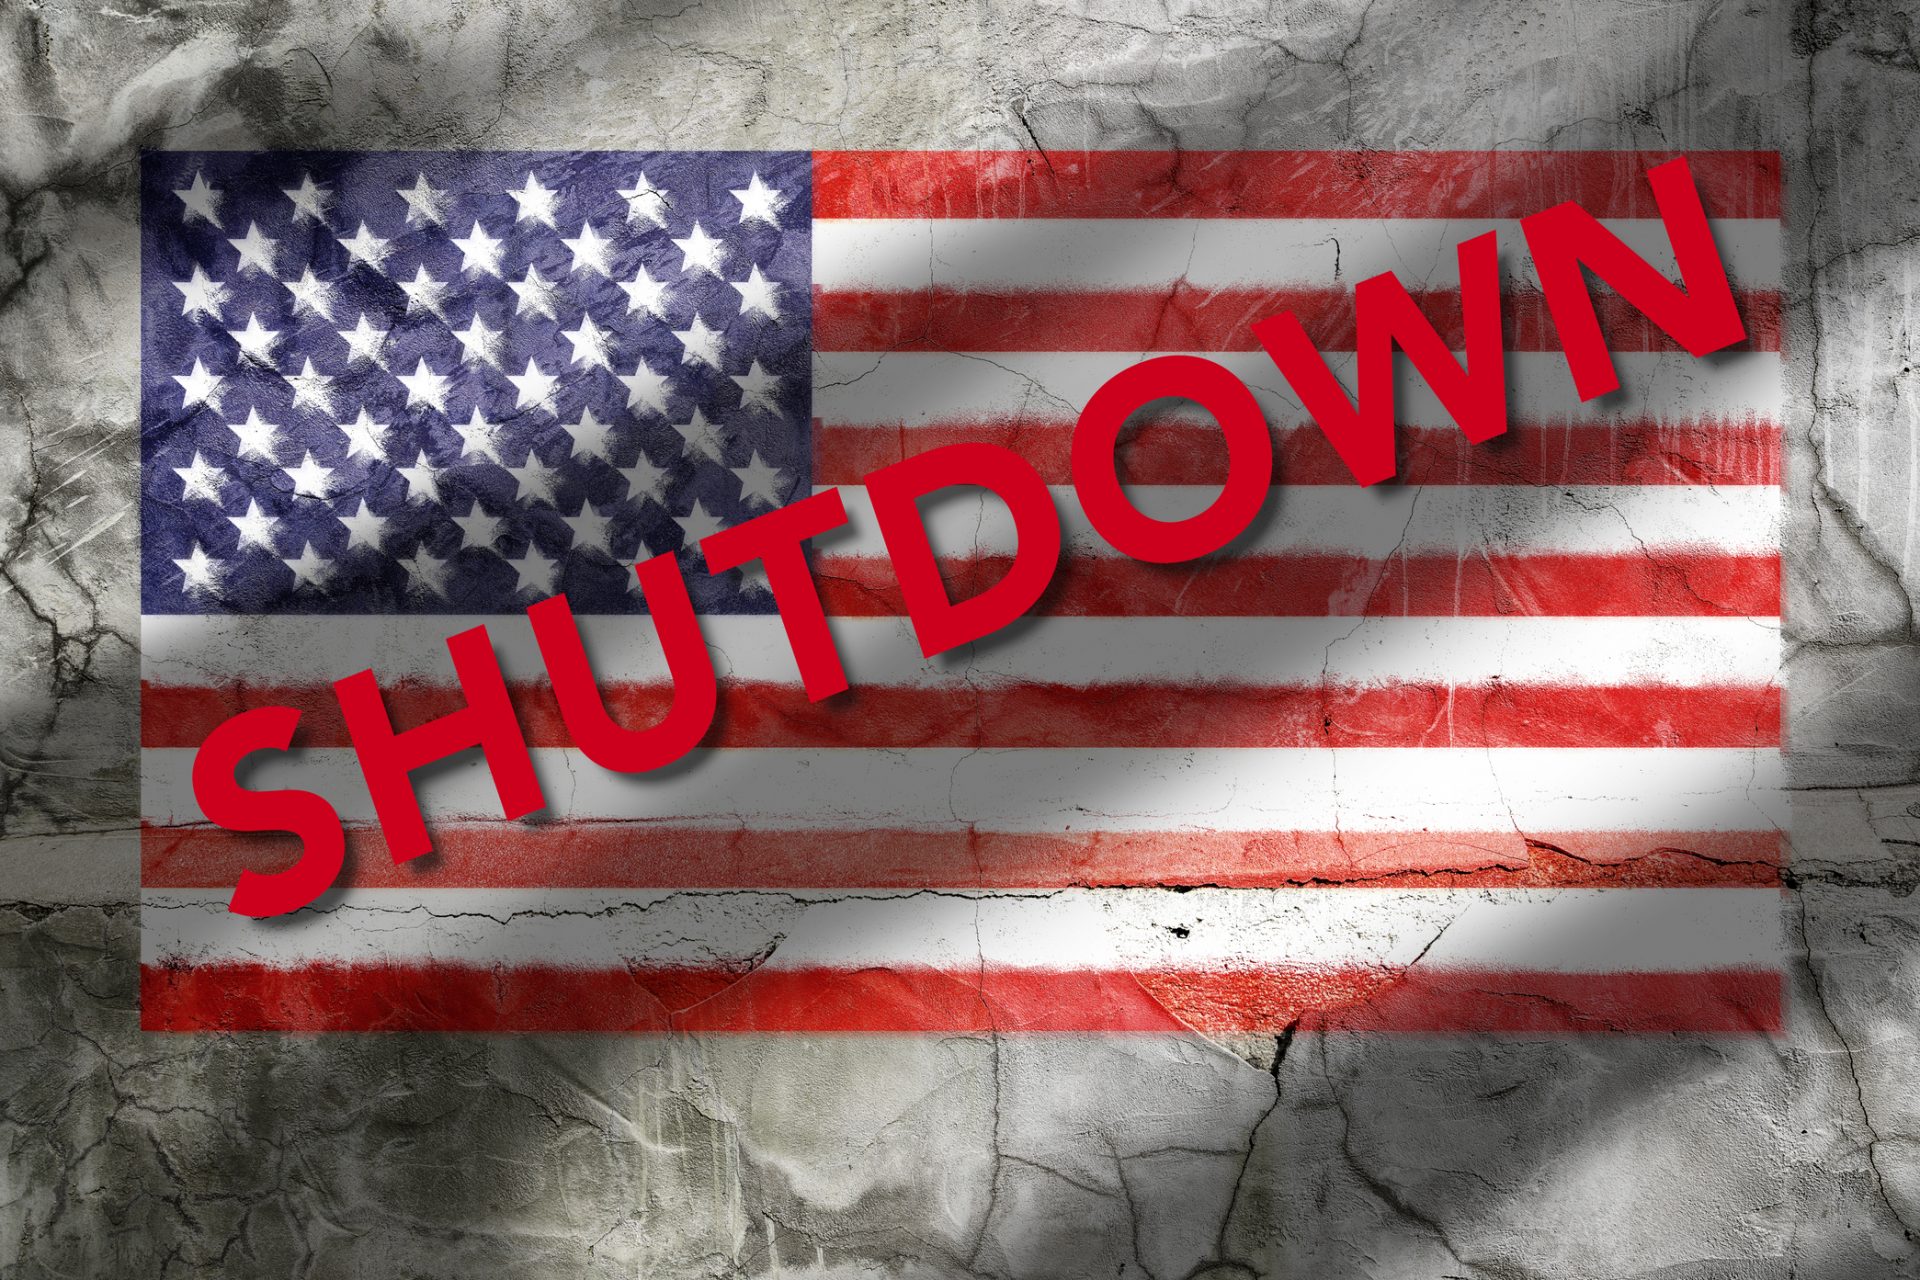 Americans aren't happy with government shutdowns being used for political games